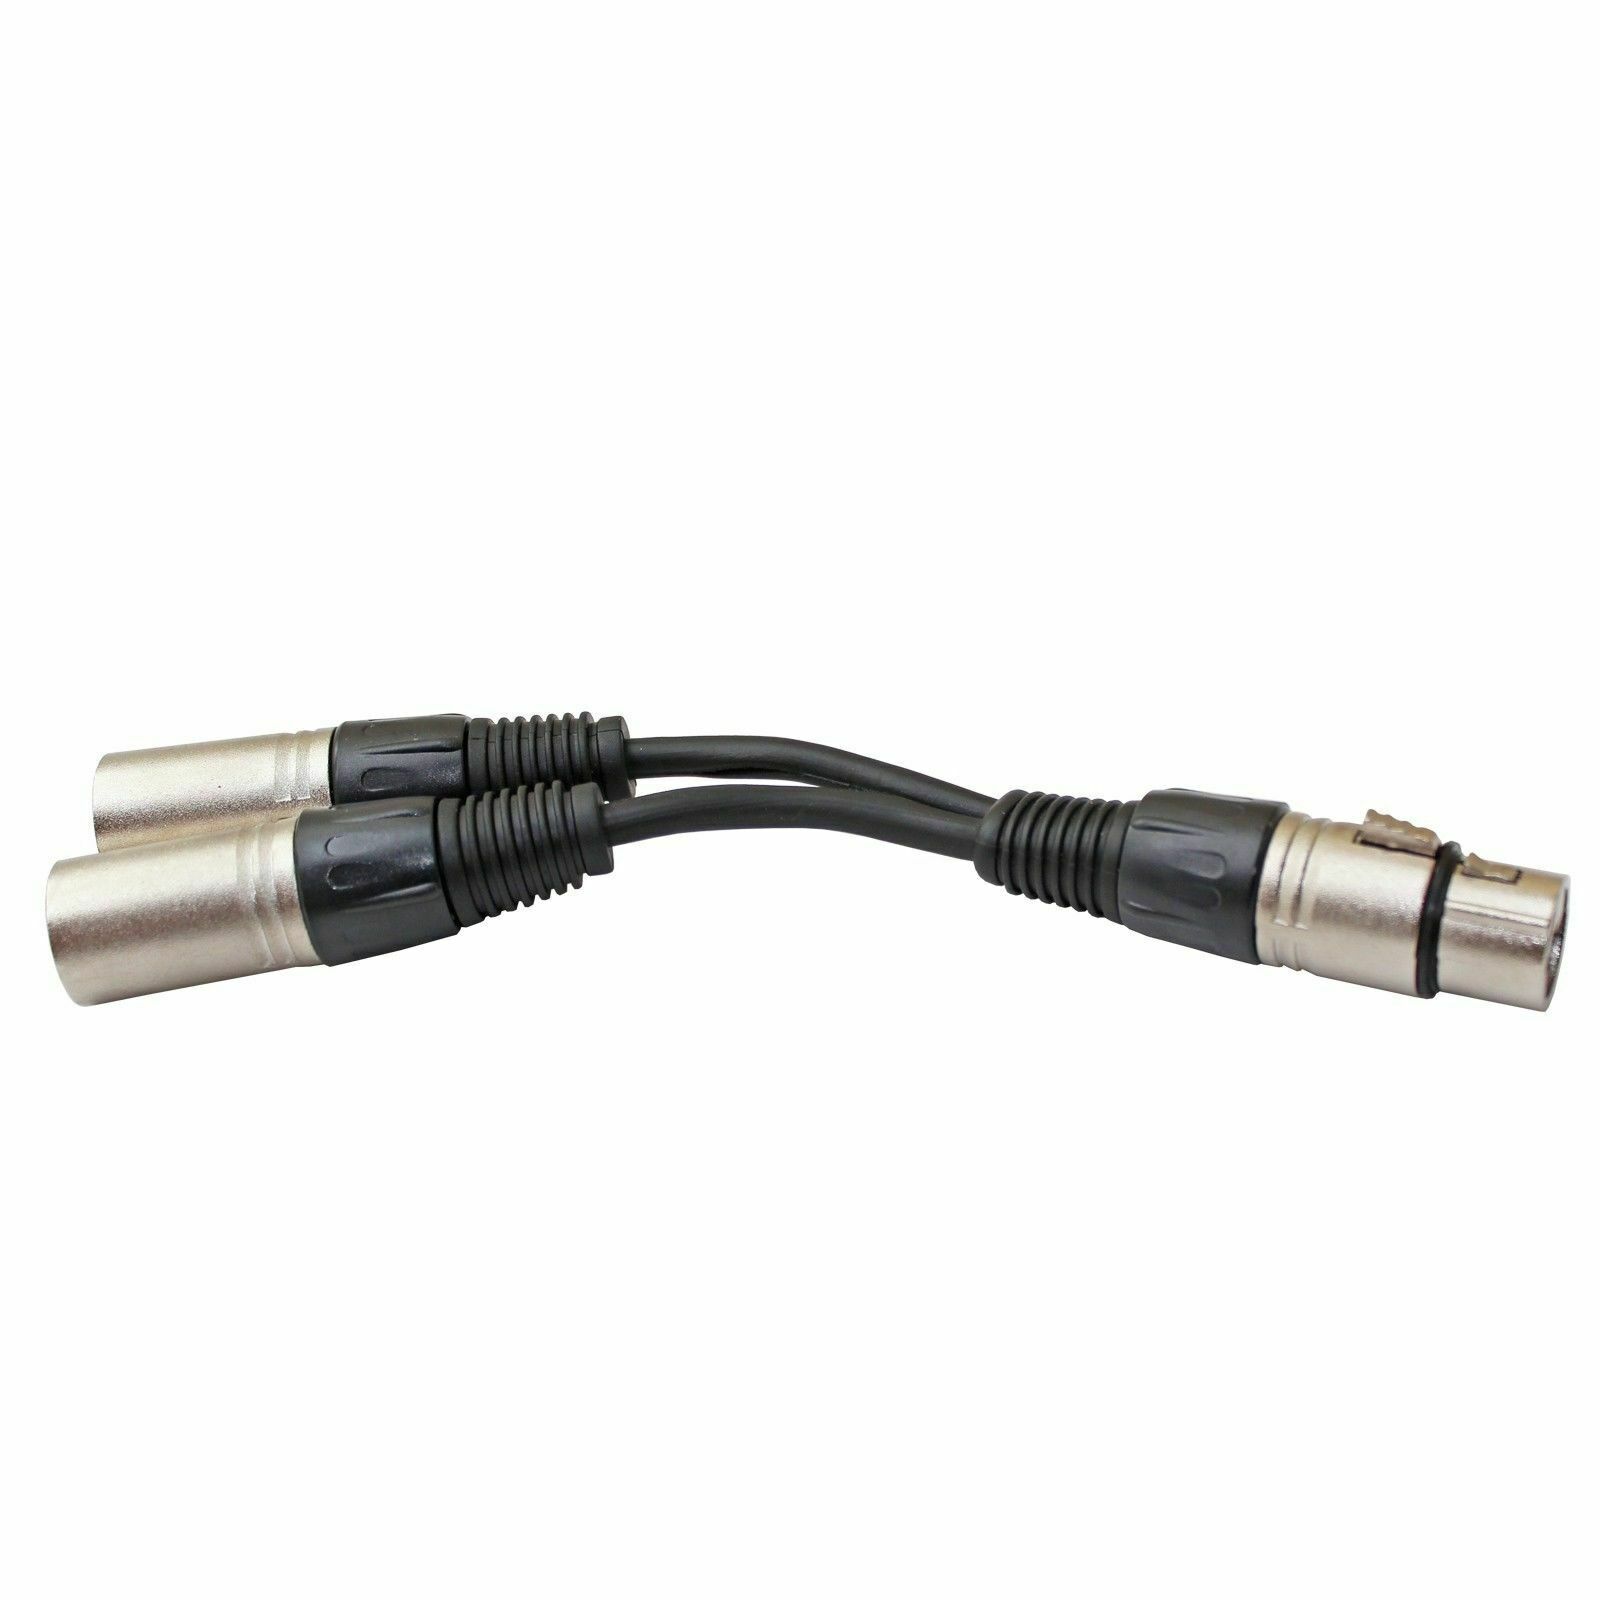 New 3pin Xlr Female Jack To Dual 2 Male Plug Y Splitter Cable Adaptor 1 Ft Cord